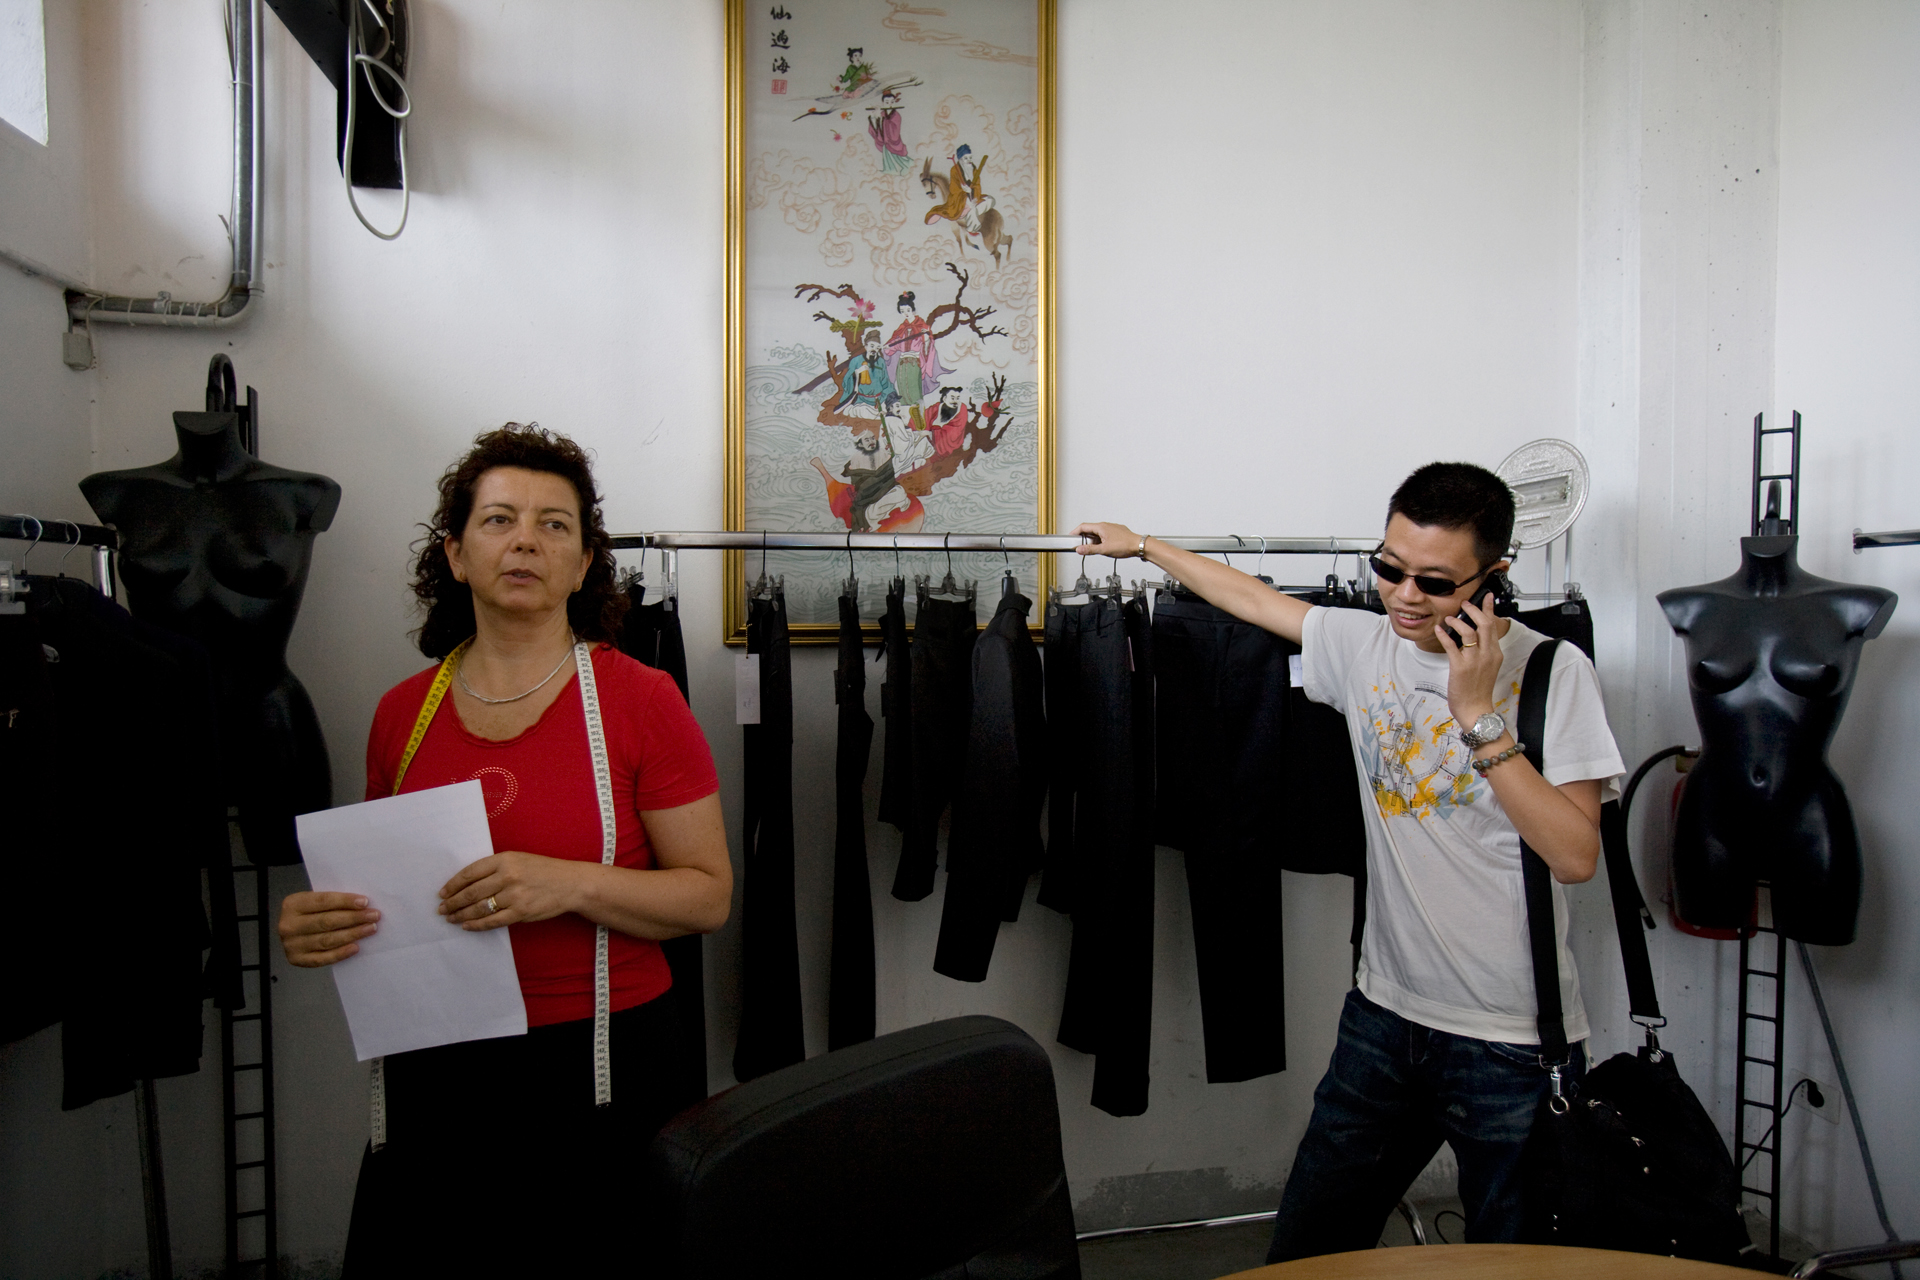  Petro, born Hu Bing Laing, makes his morning rounds among some of the businesses his family manages, including a clothing design studio, where mostly Italian employees produce showroom pieces, often "inspired" by popular high-end designers. 